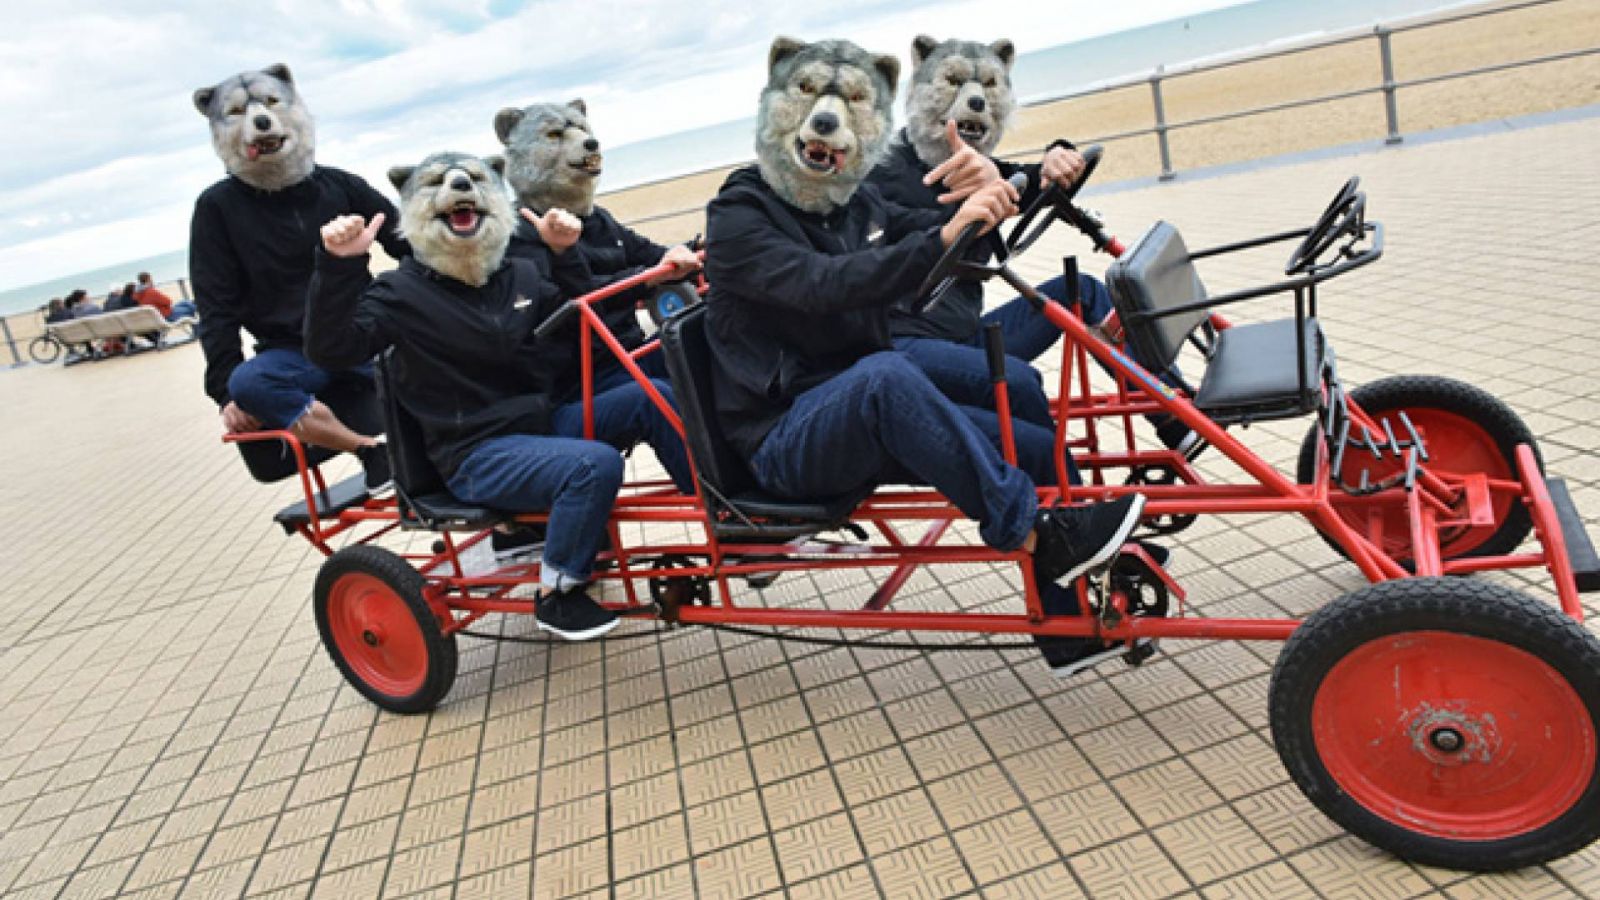 Cyfrowy singiel MAN WITH A MISSION © Sony Music Entertainment (Japan) Inc. All rights reserved.